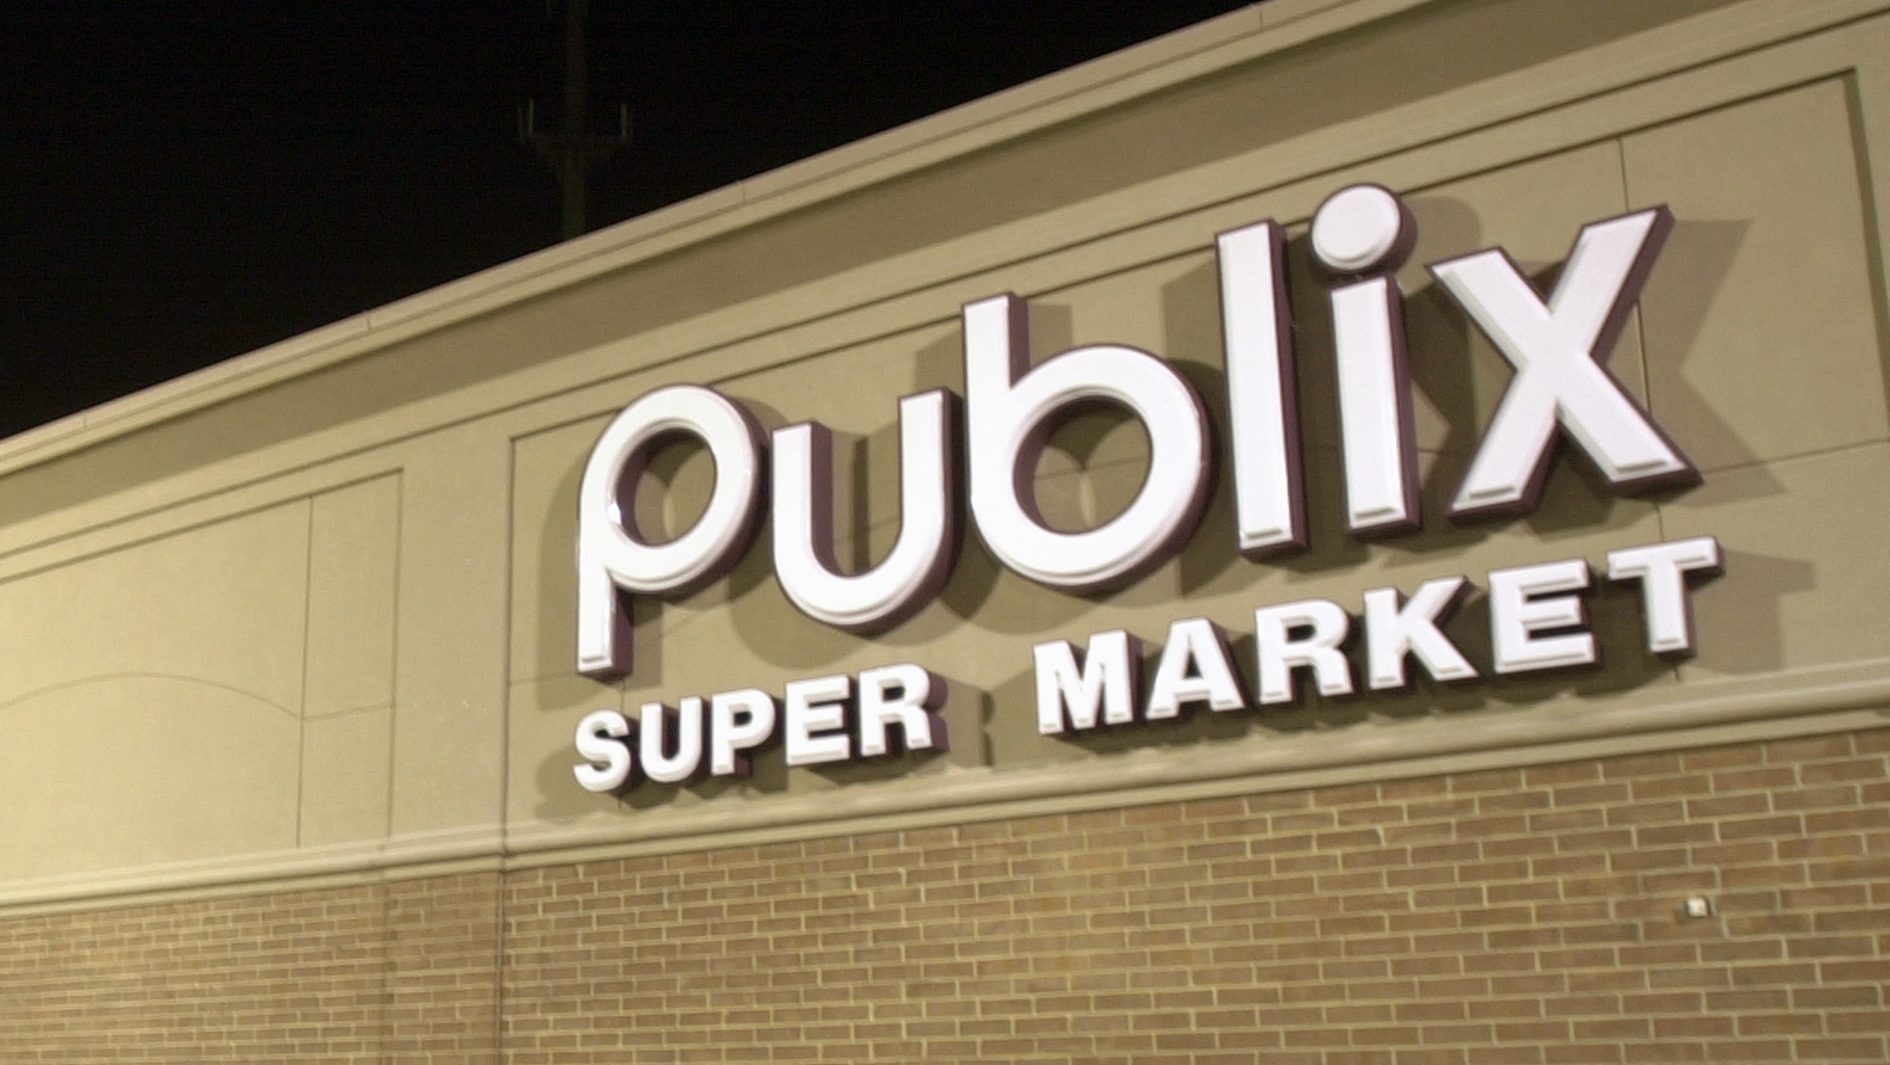 Is Publix Open on Labor Day Monday 2019?